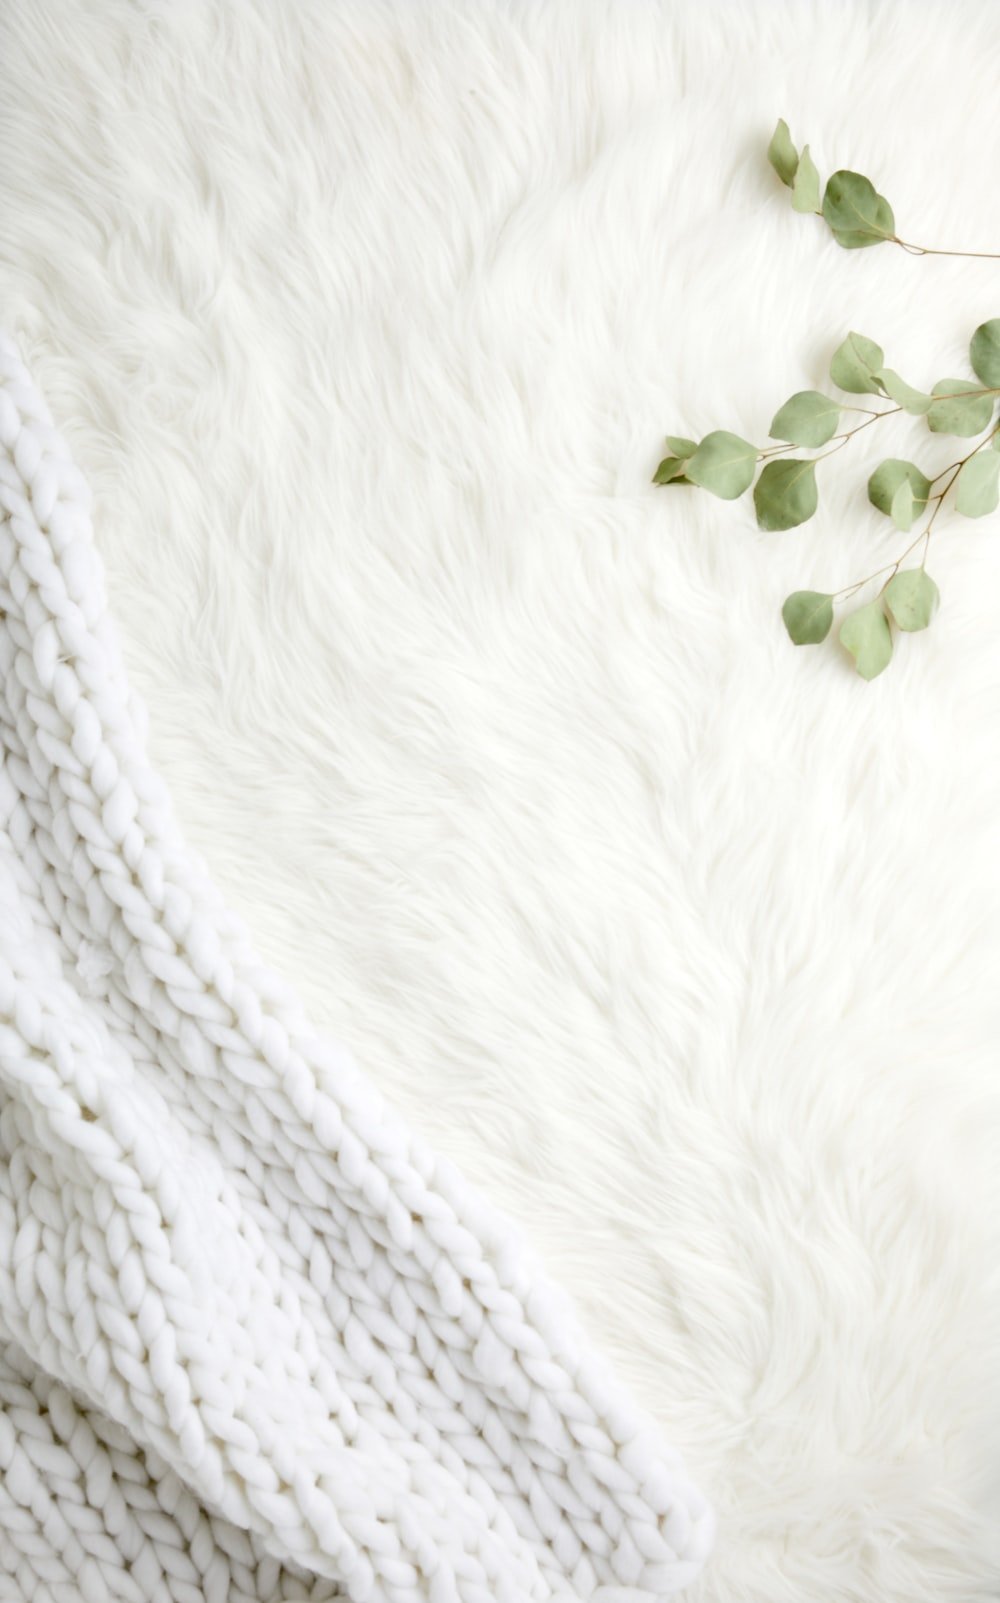 White Fur Picture. Download Free Image